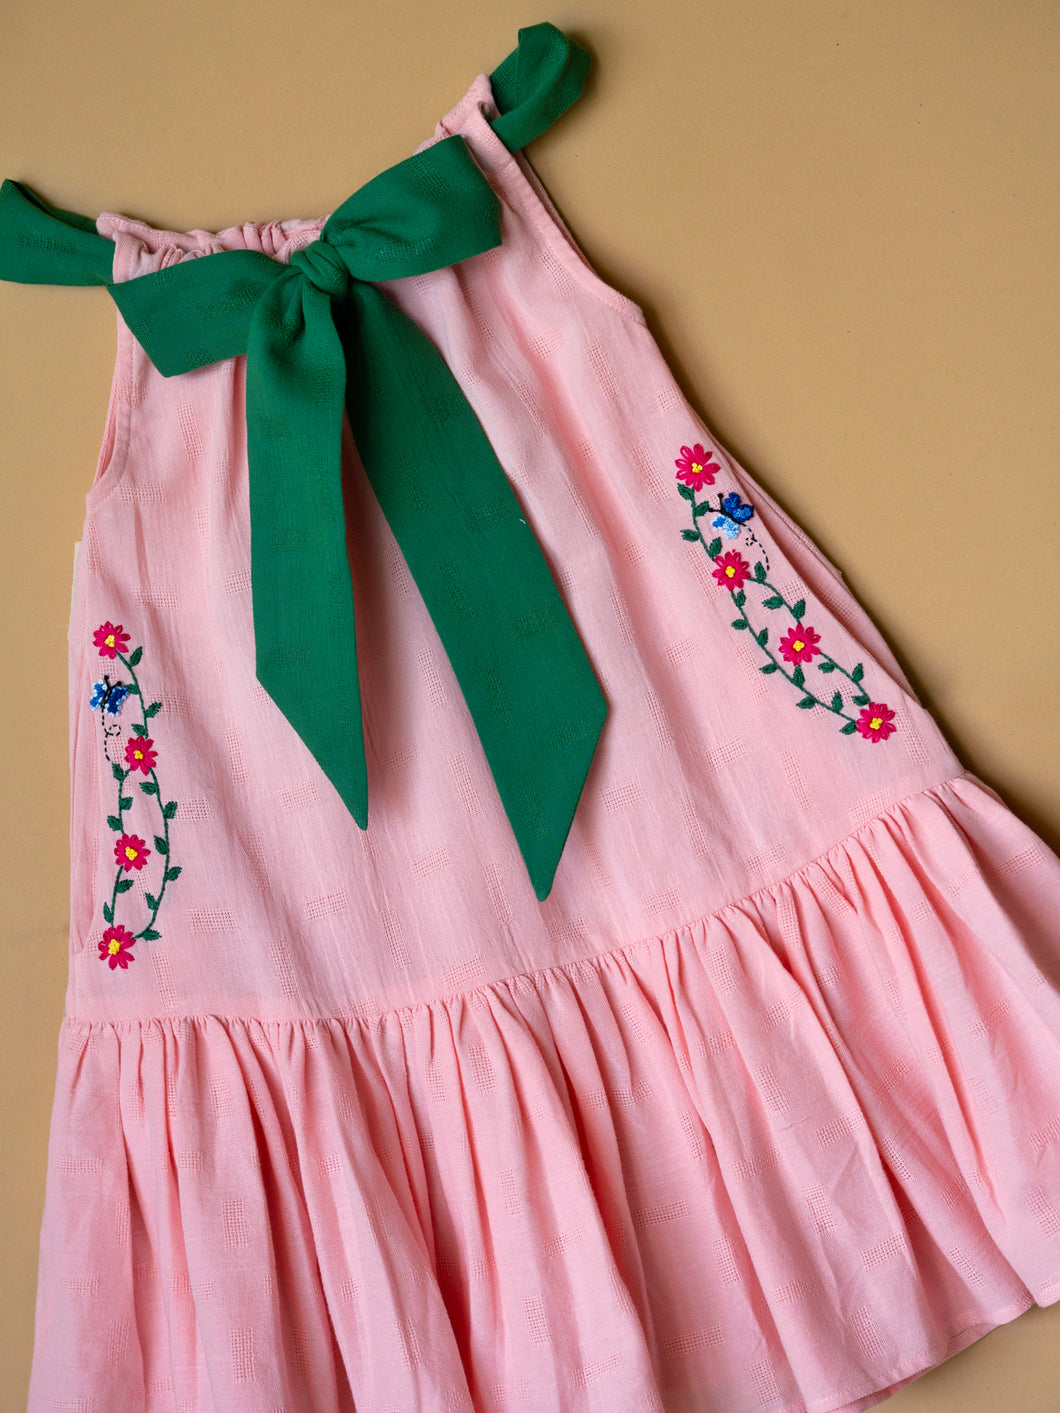 A beautiful dress with extra-long bow tie strap kept on a floor.